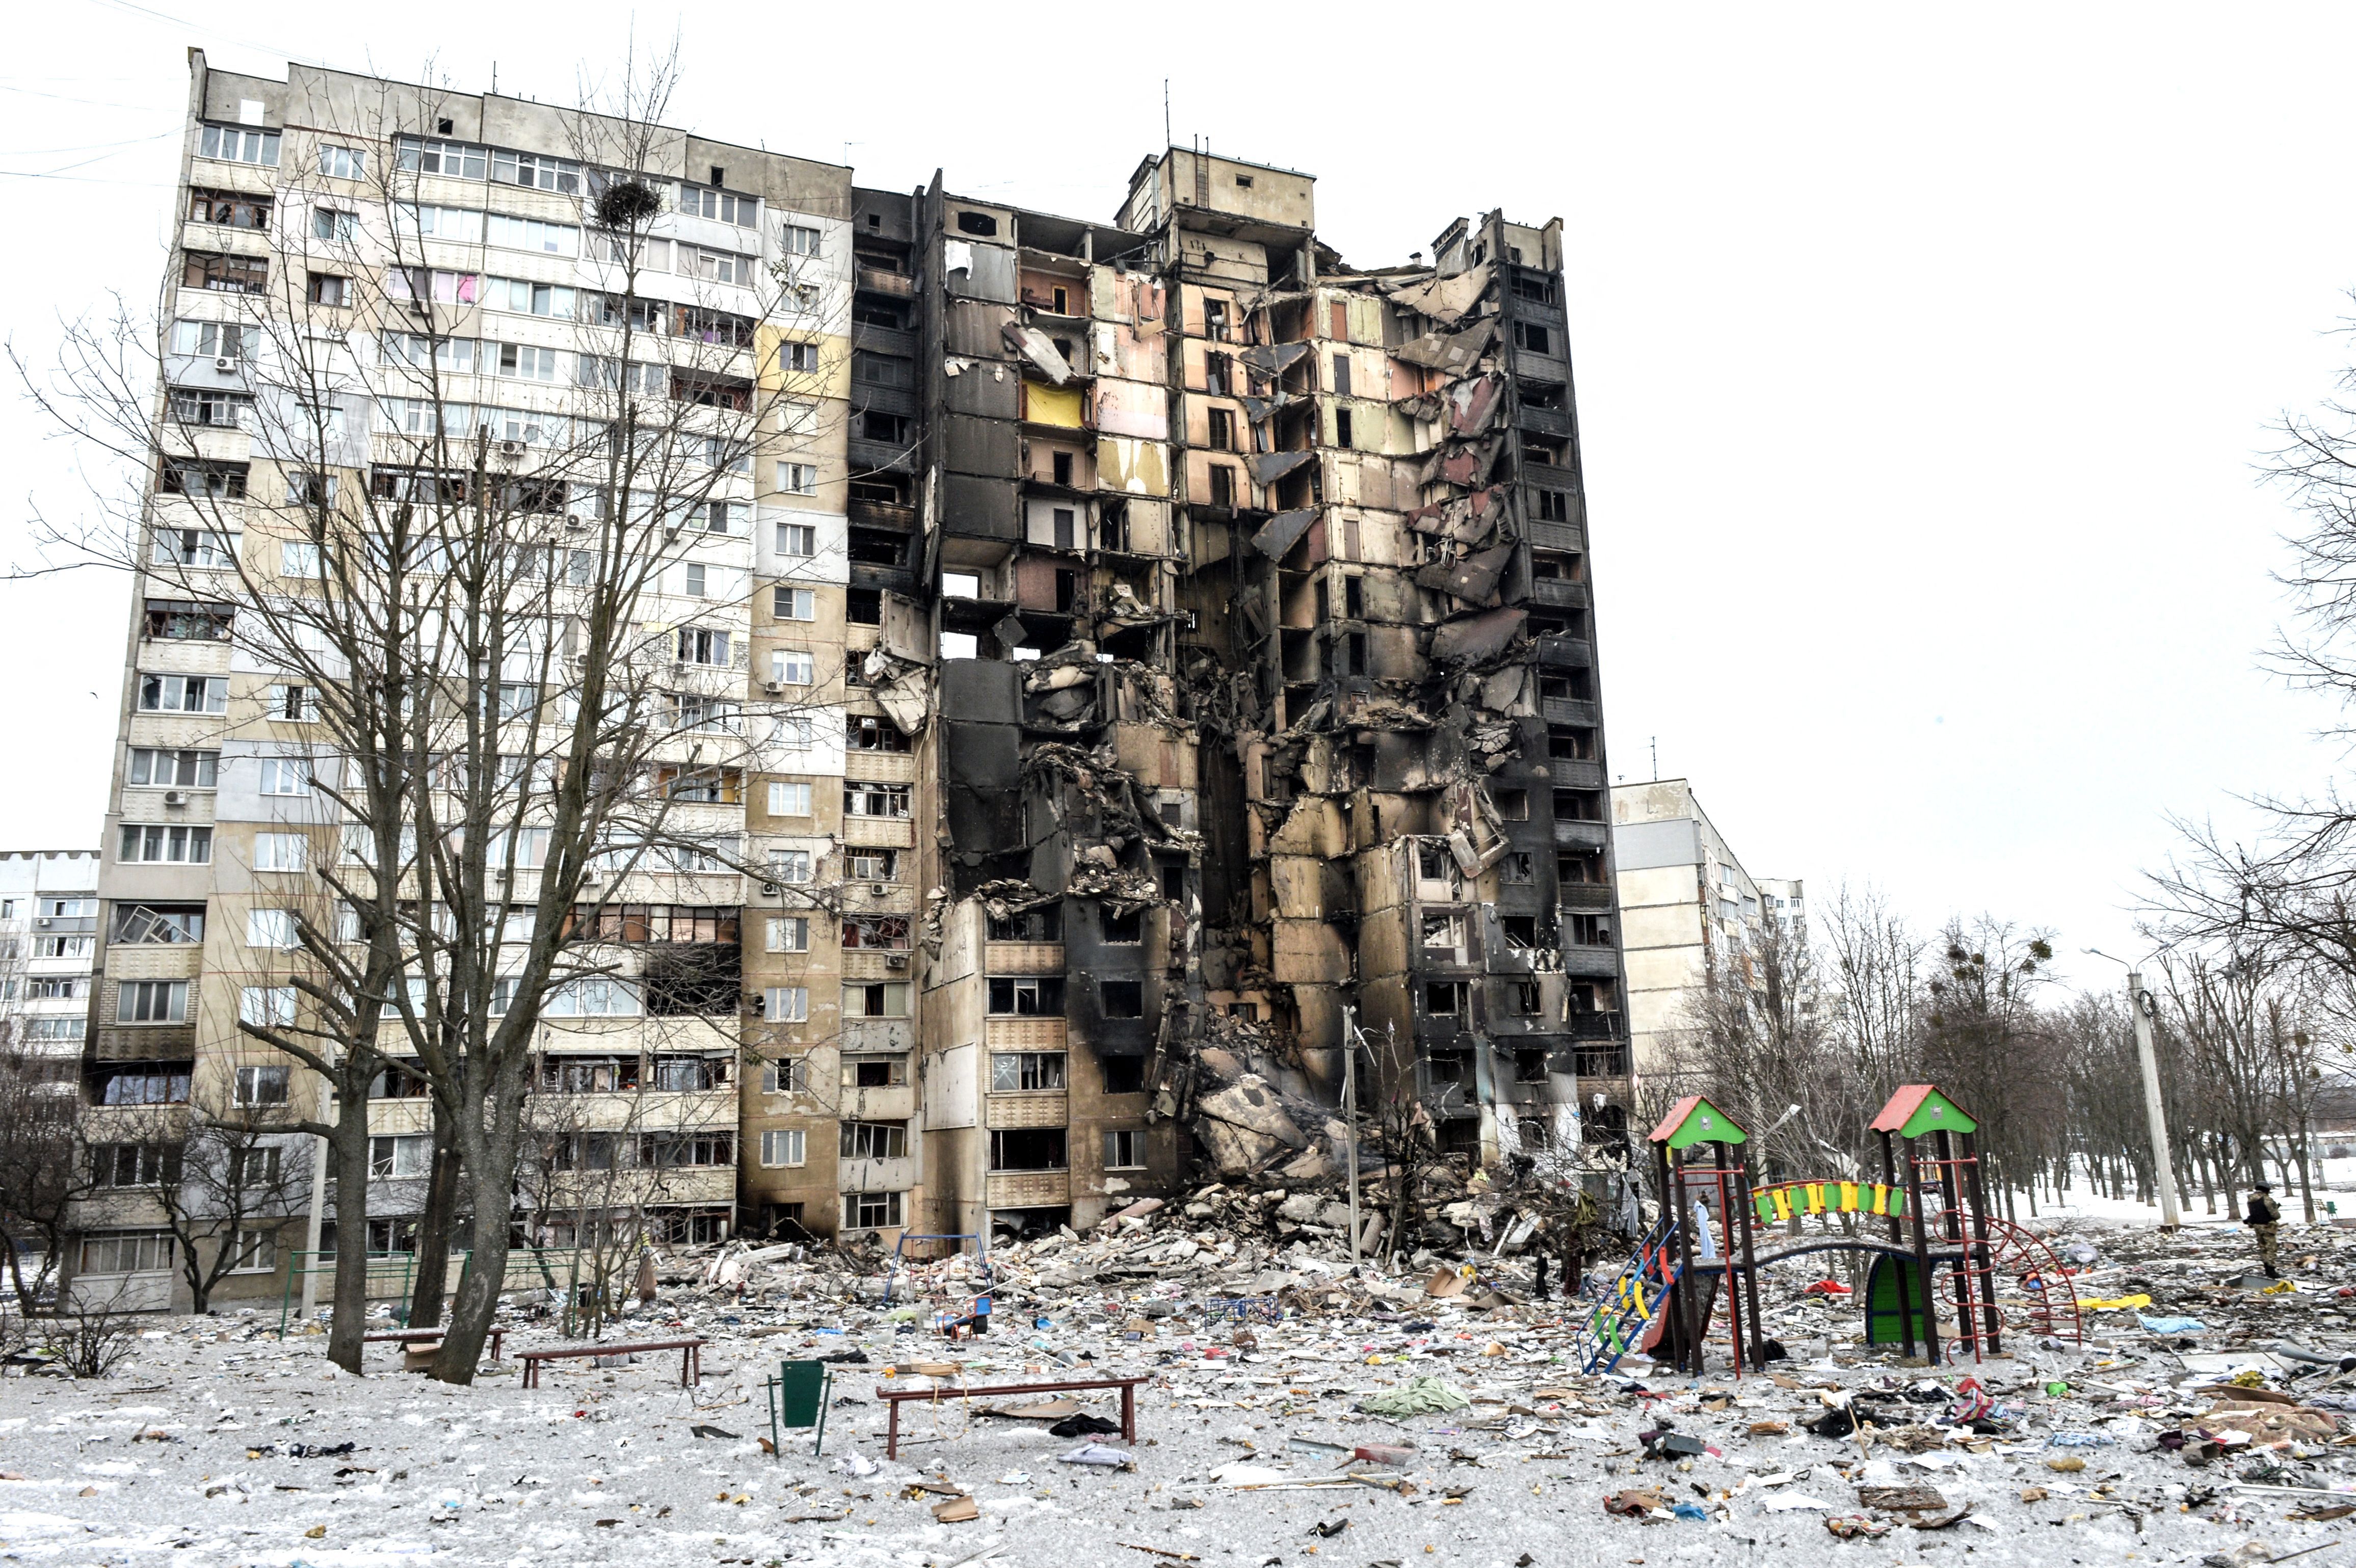 An apartment building damaged after shelling the day before in Ukraine's second-biggest city of Kharkiv on March 8.